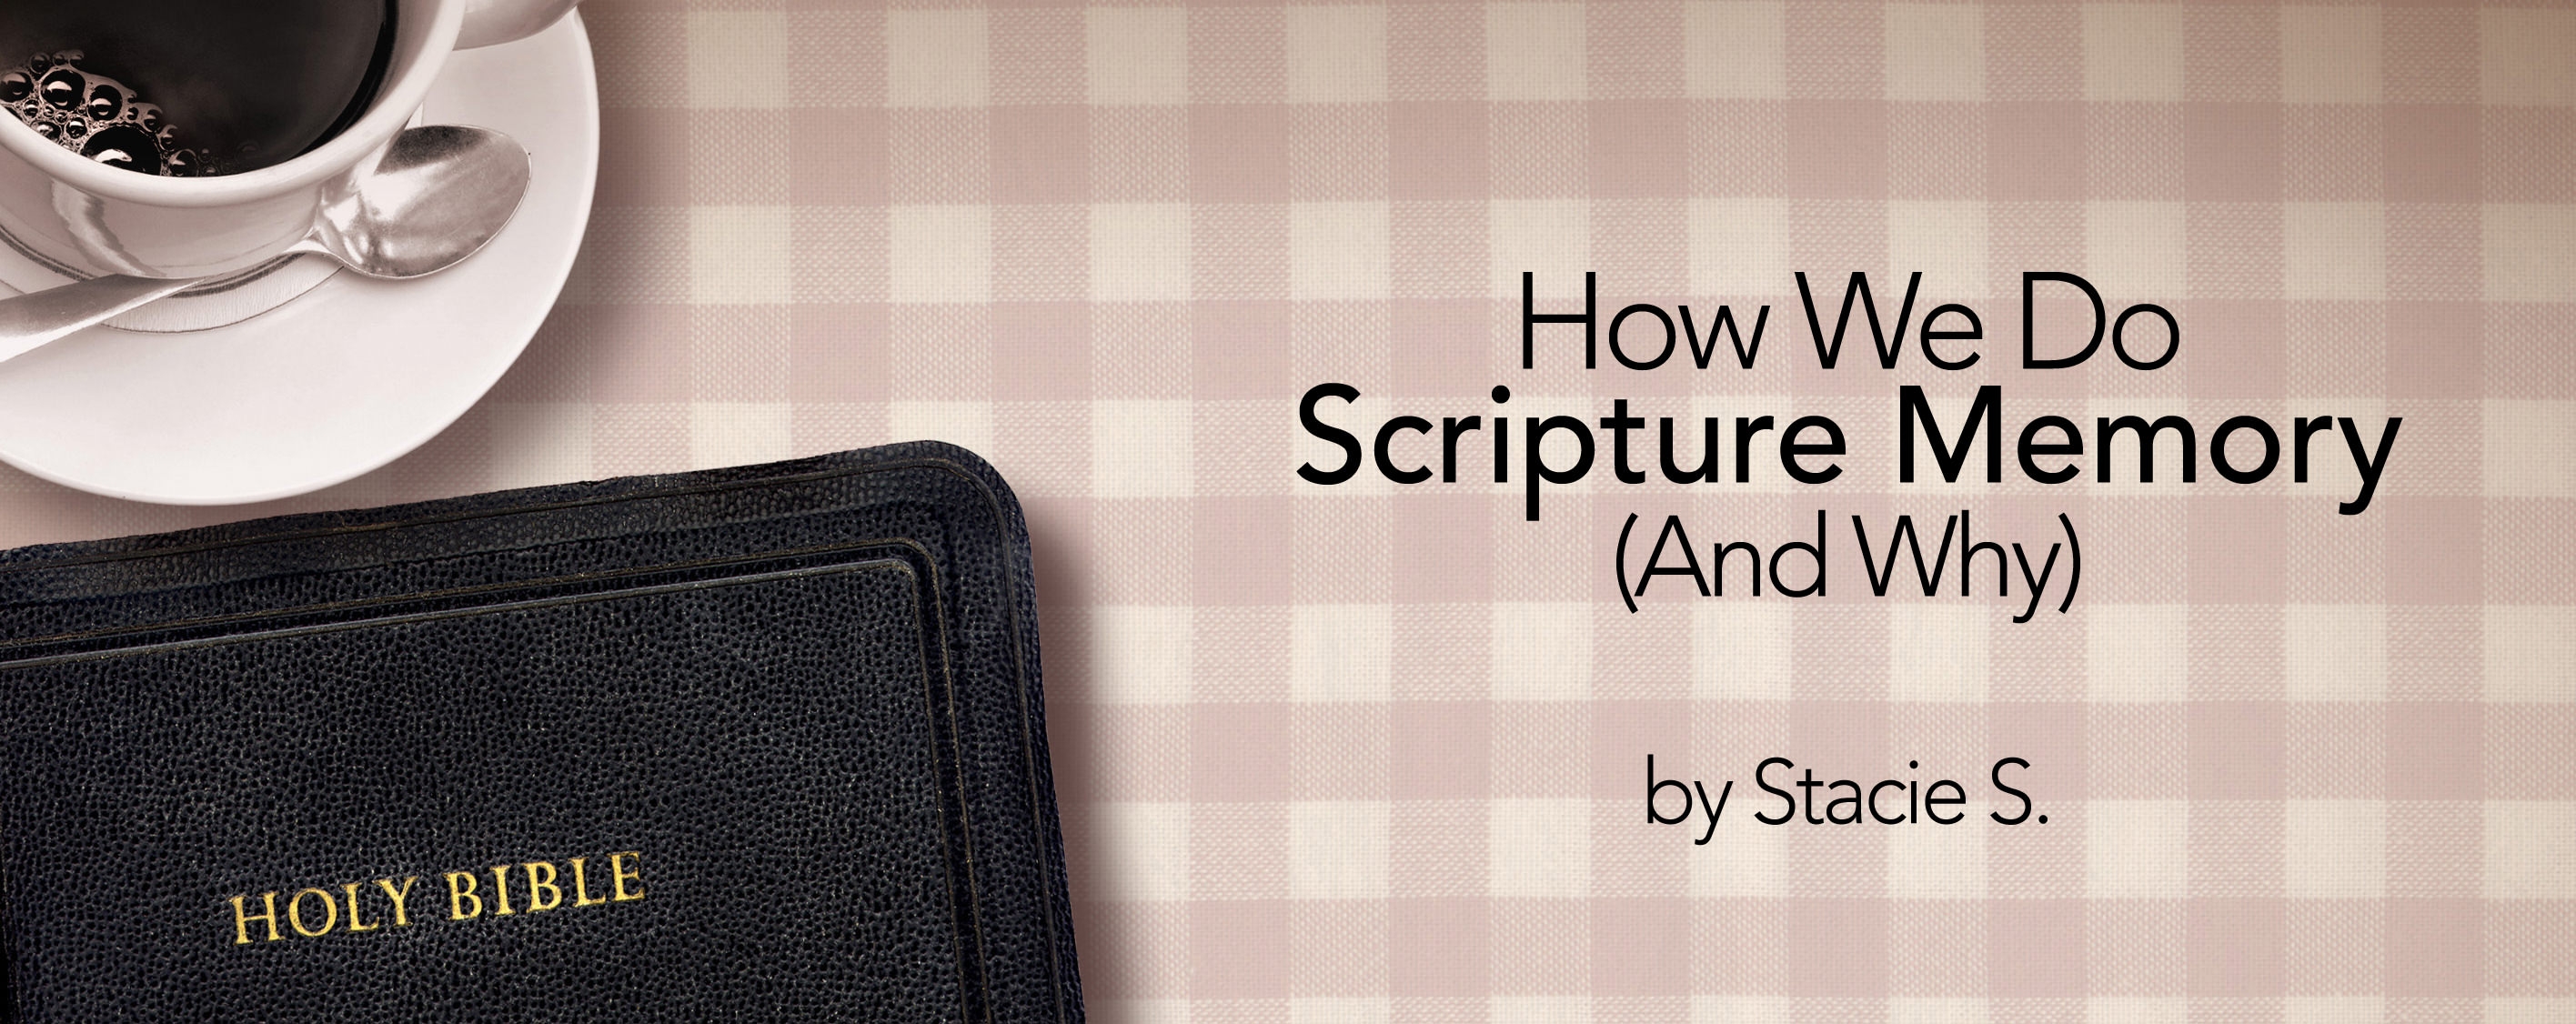 How We Do Scripture Memory (and Why)